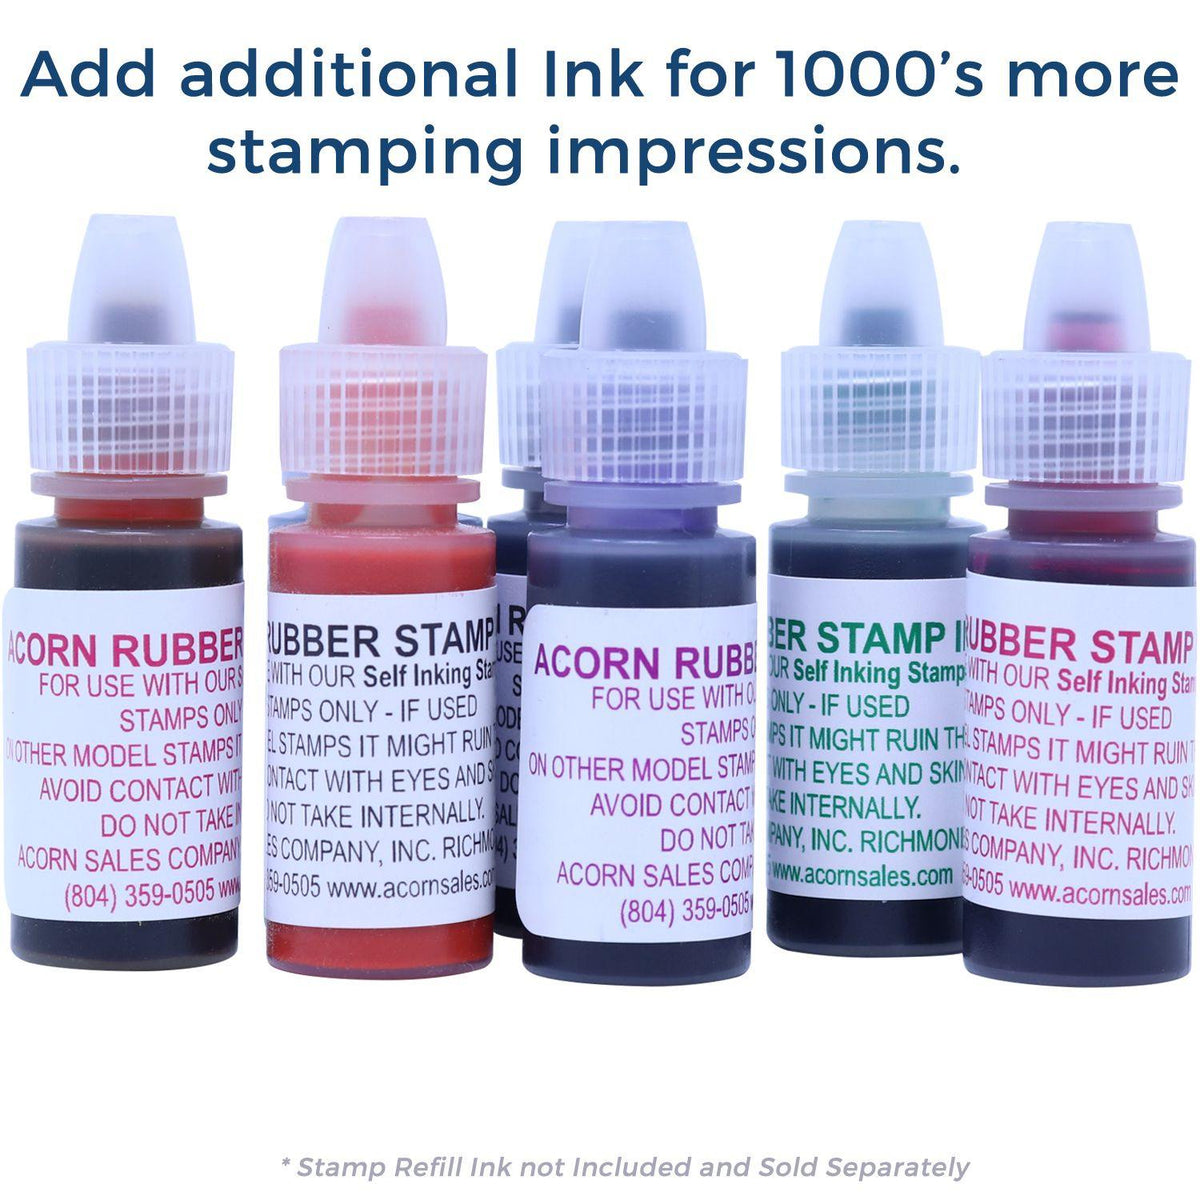 Refill Inks for Large Pre-Inked Photographs Do Not Bend Stamp Available